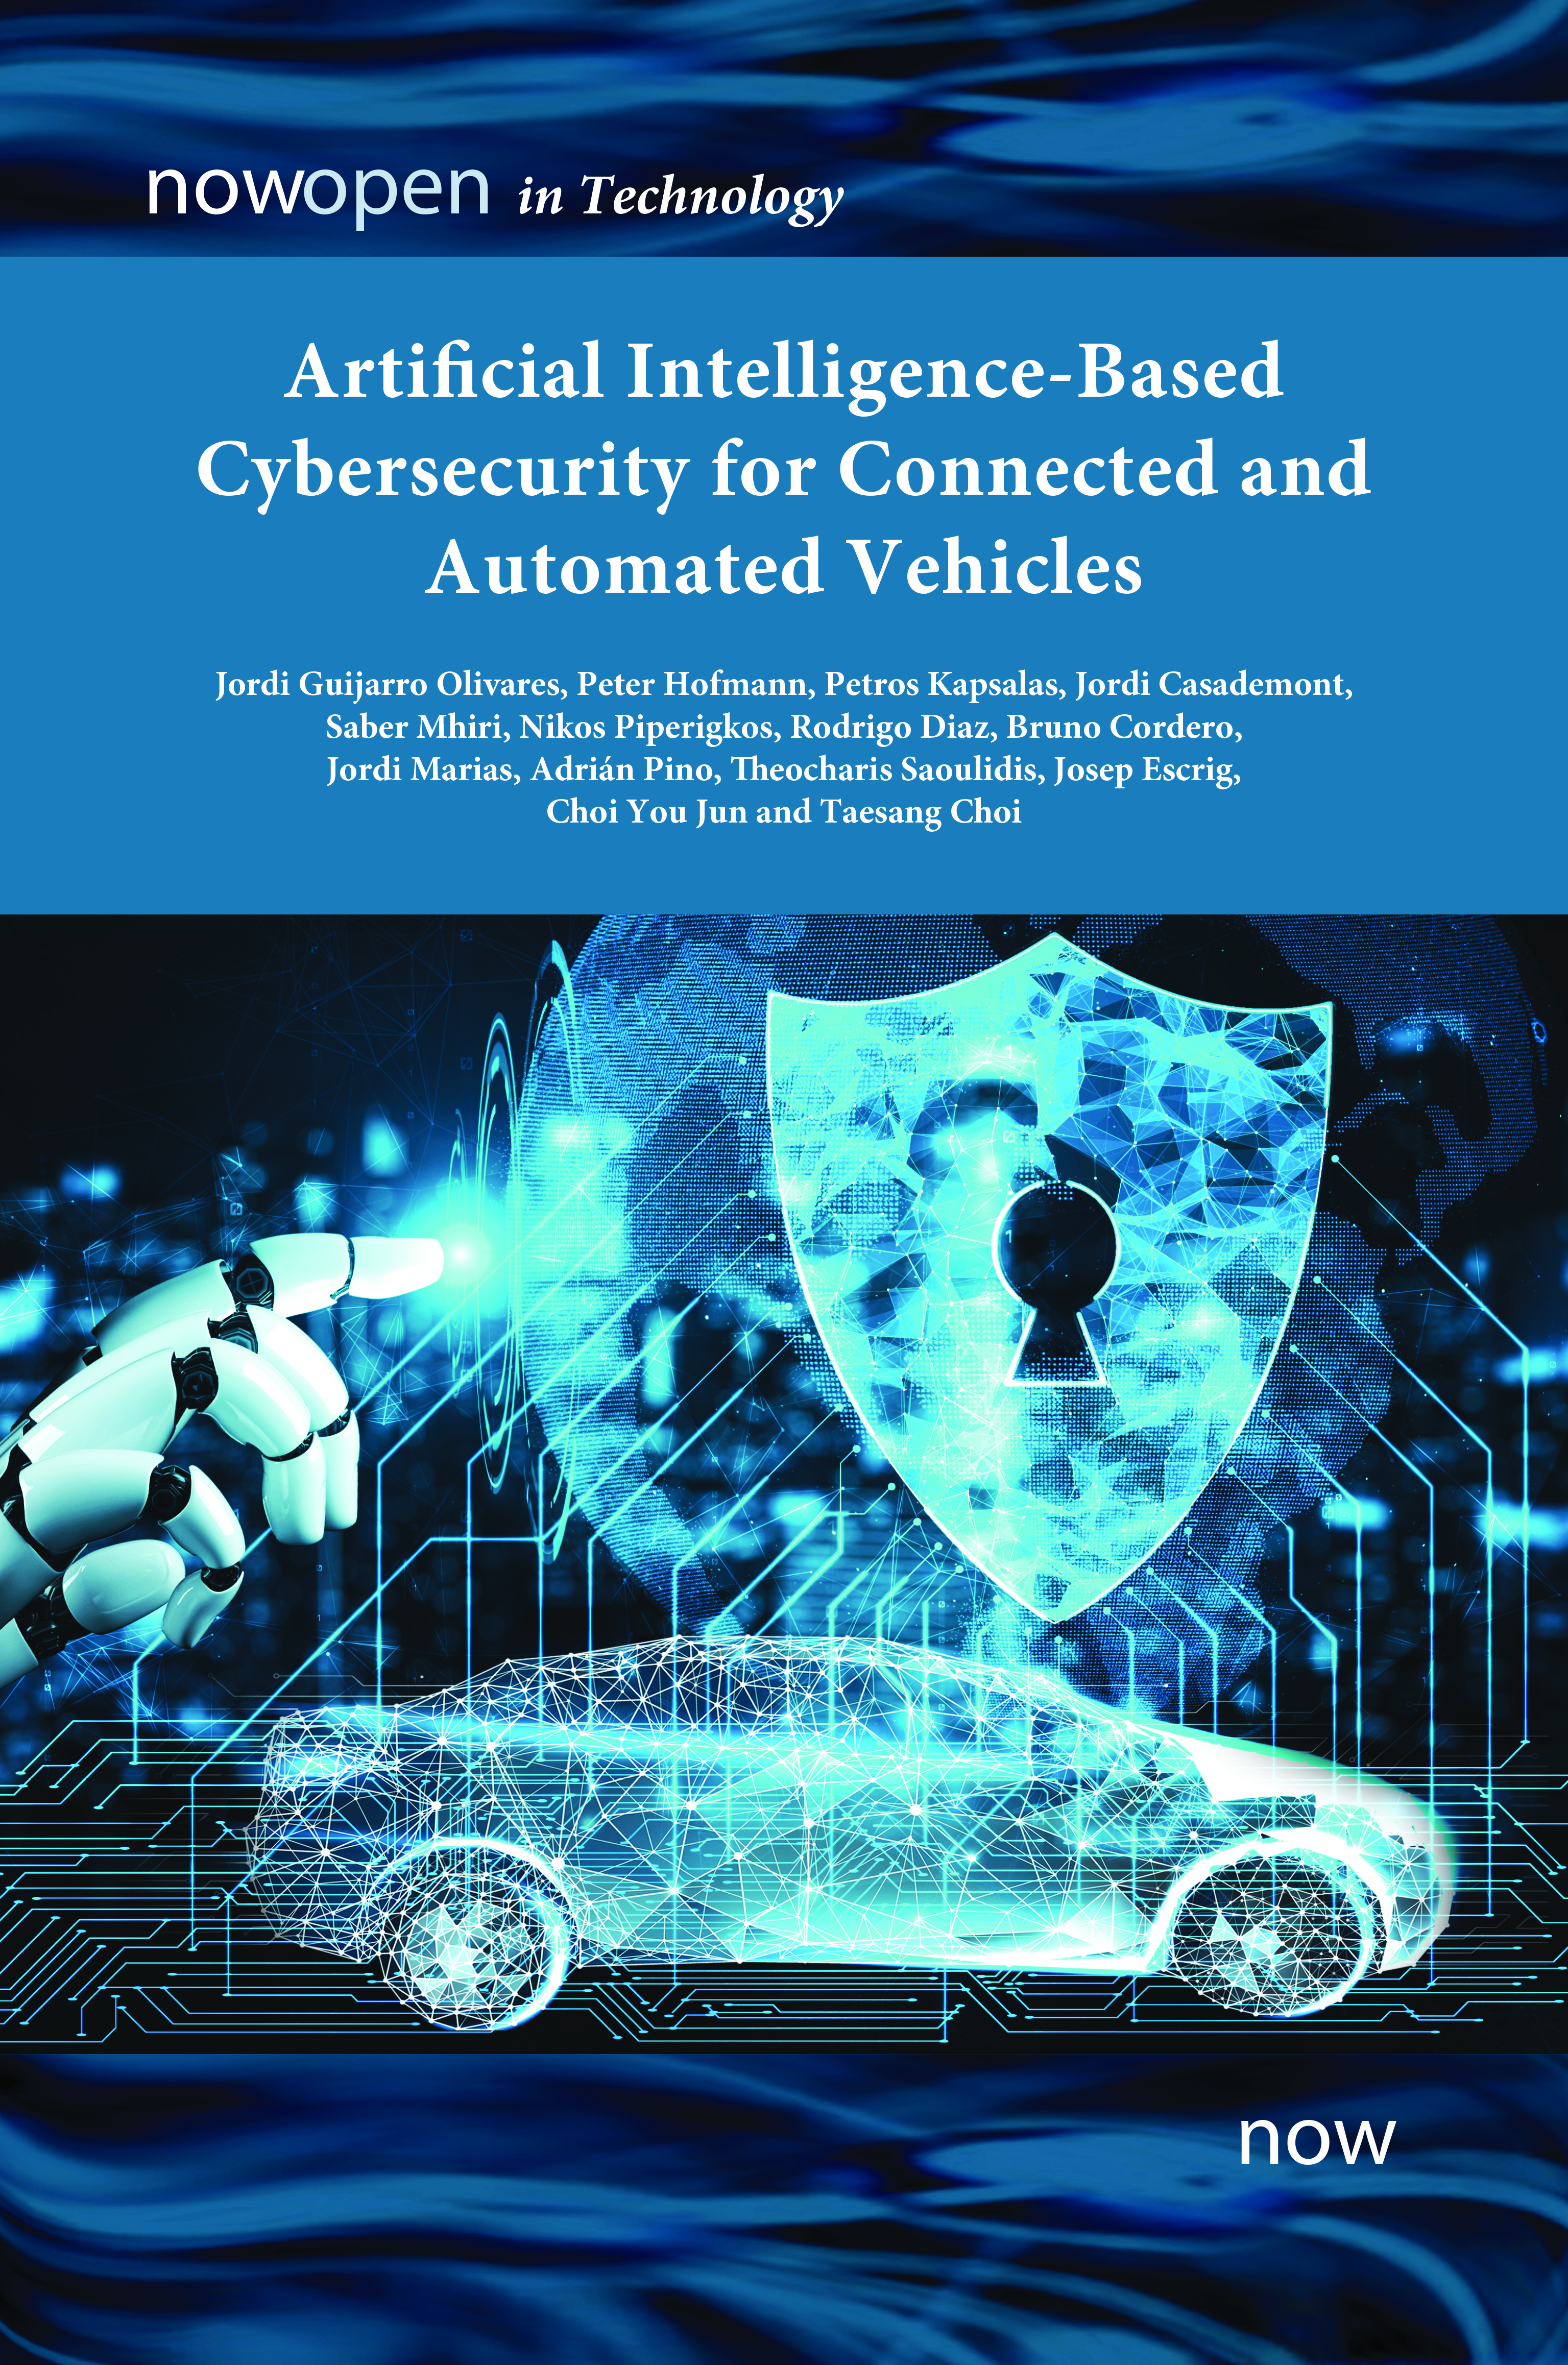 Artificial Intelligence-based Cybersecurity for Connected and Automated Vehicles